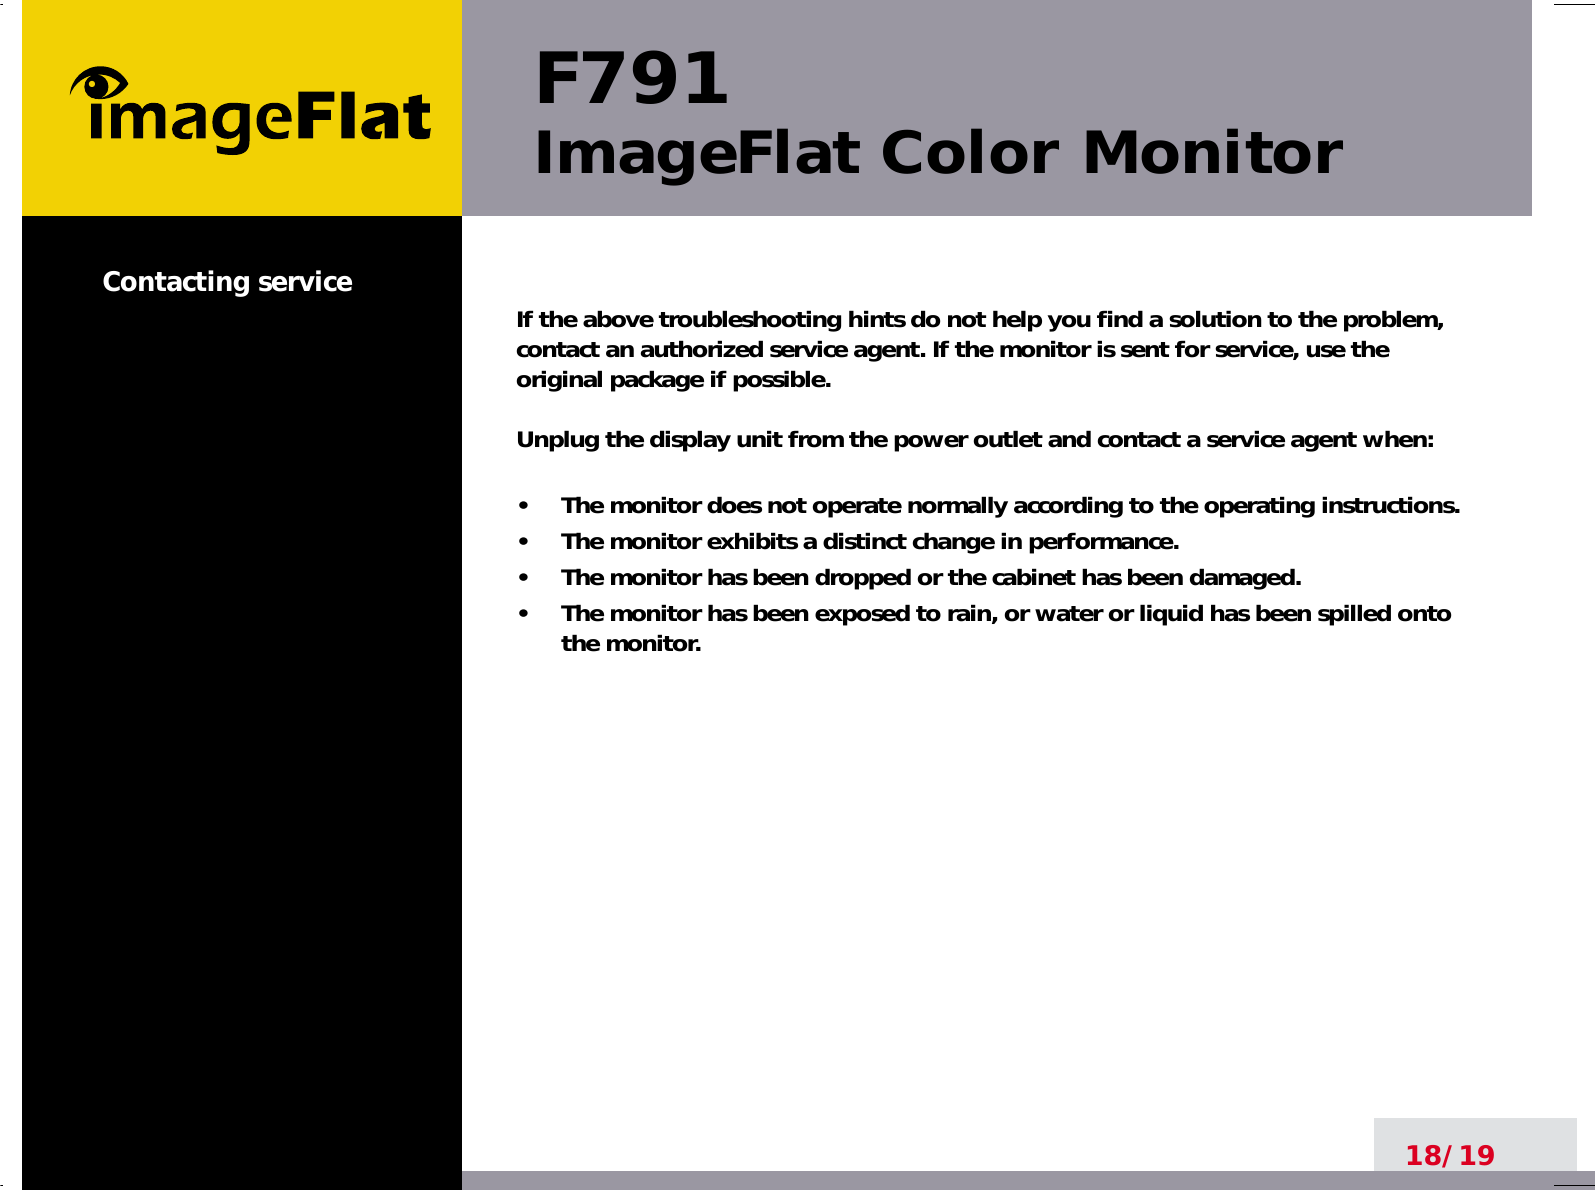 F791ImageFlat Color Monitor18/19Contacting service If the above troubleshooting hints do not help you find a solution to the problem,contact an authorized service agent. If the monitor is sent for service, use theoriginal package if possible.Unplug the display unit from the power outlet and contact a service agent when:•     The monitor does not operate normally according to the operating instructions.•     The monitor exhibits a distinct change in performance.•     The monitor has been dropped or the cabinet has been damaged.•     The monitor has been exposed to rain, or water or liquid has been spilled ontothe monitor.